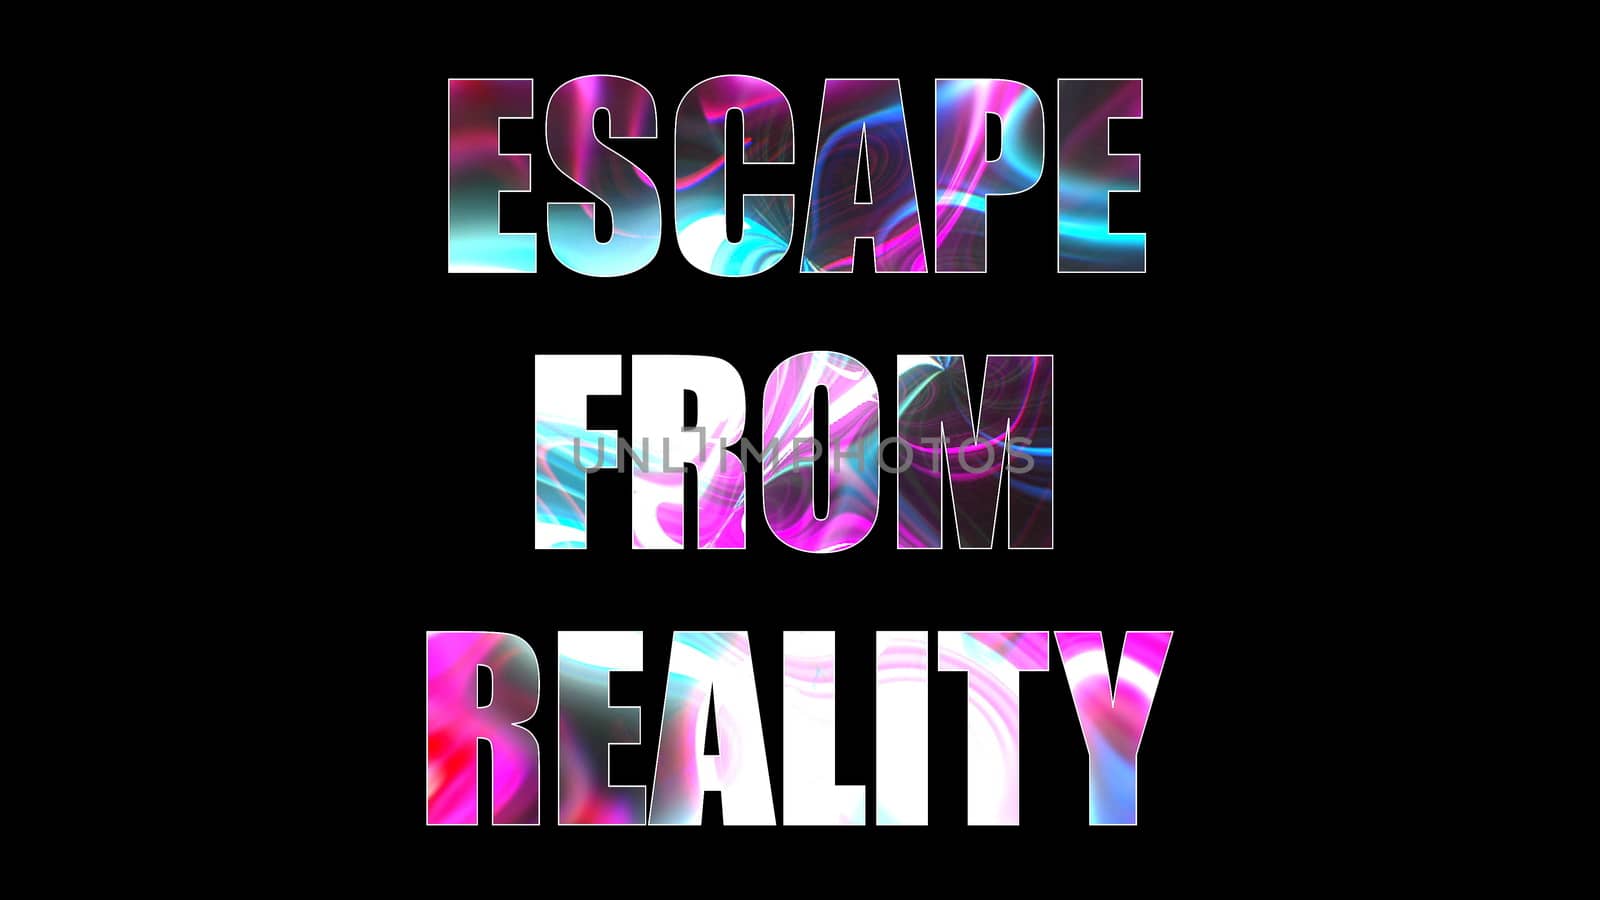 Letters of bright shiny Escape from reality text, 3d rendering background, computer generating for gaming